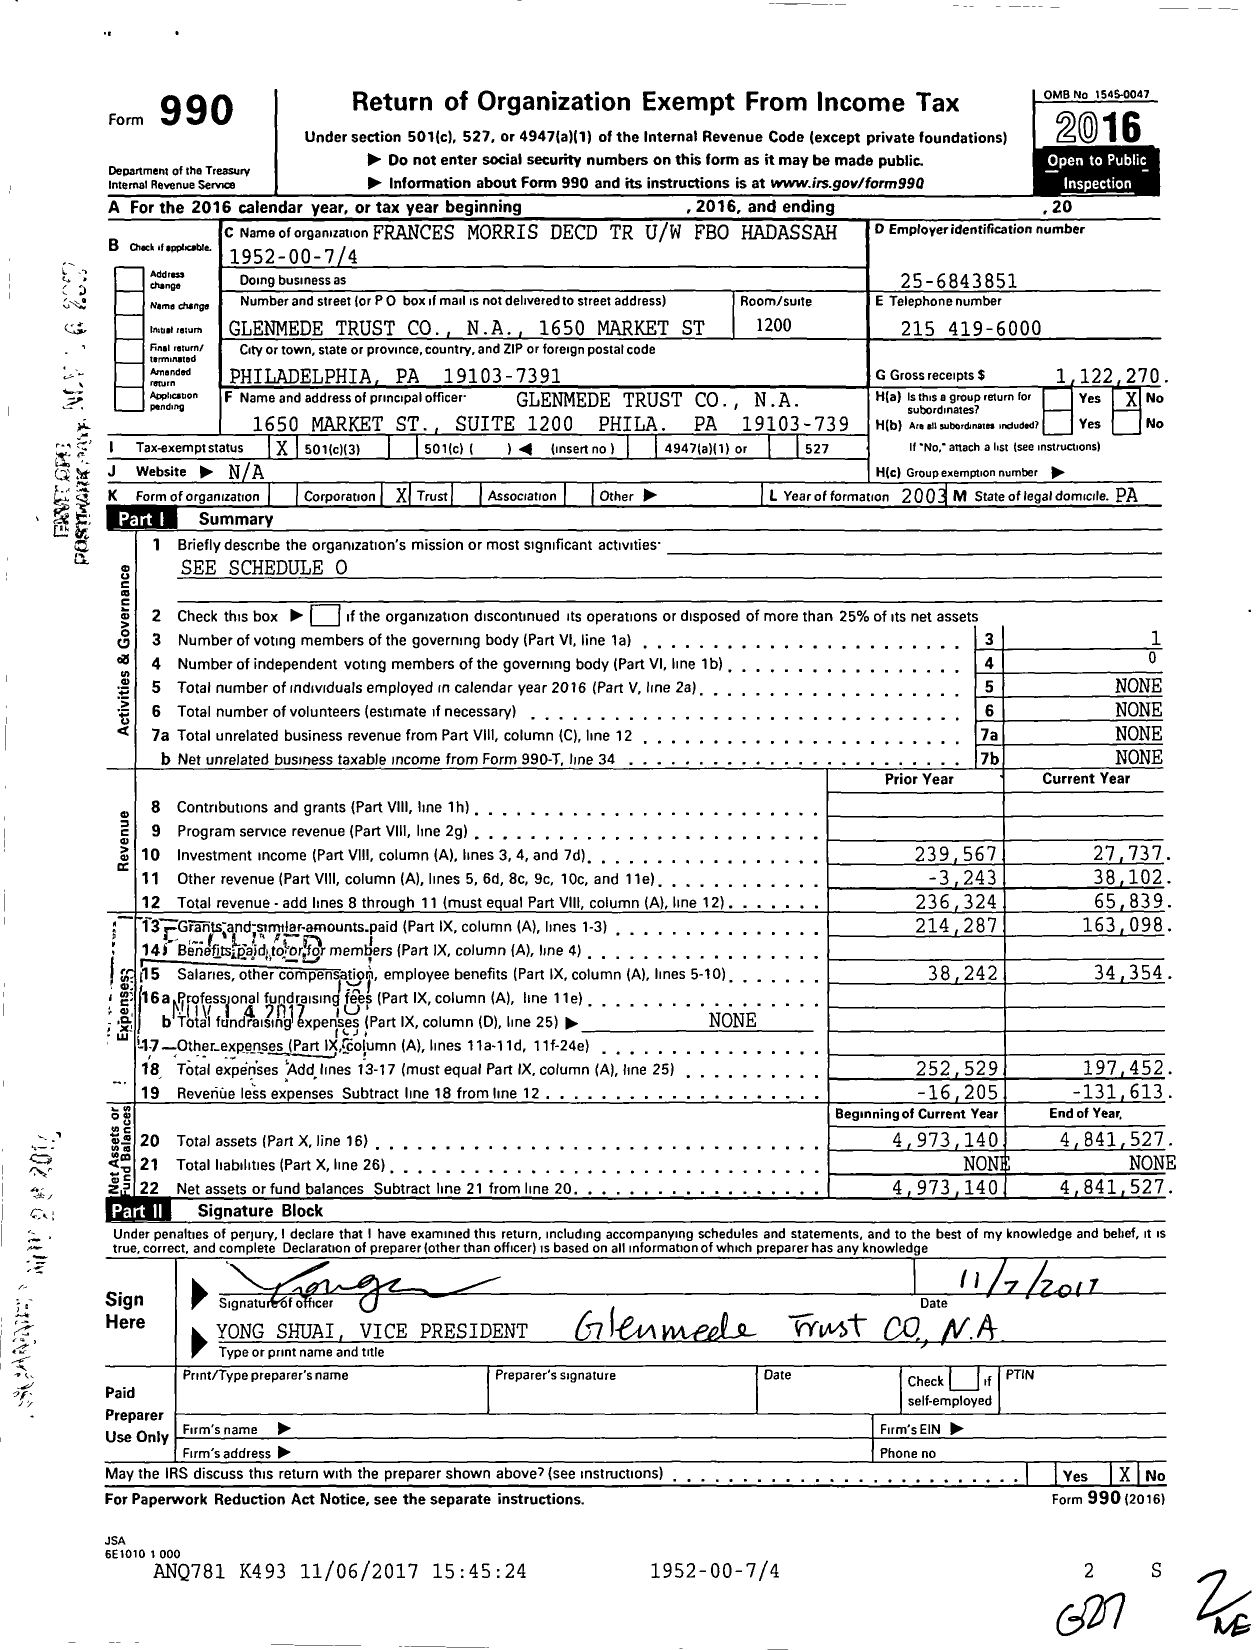 Image of first page of 2016 Form 990 for Frances Morris Decd TR Uw Fbo Hadassah